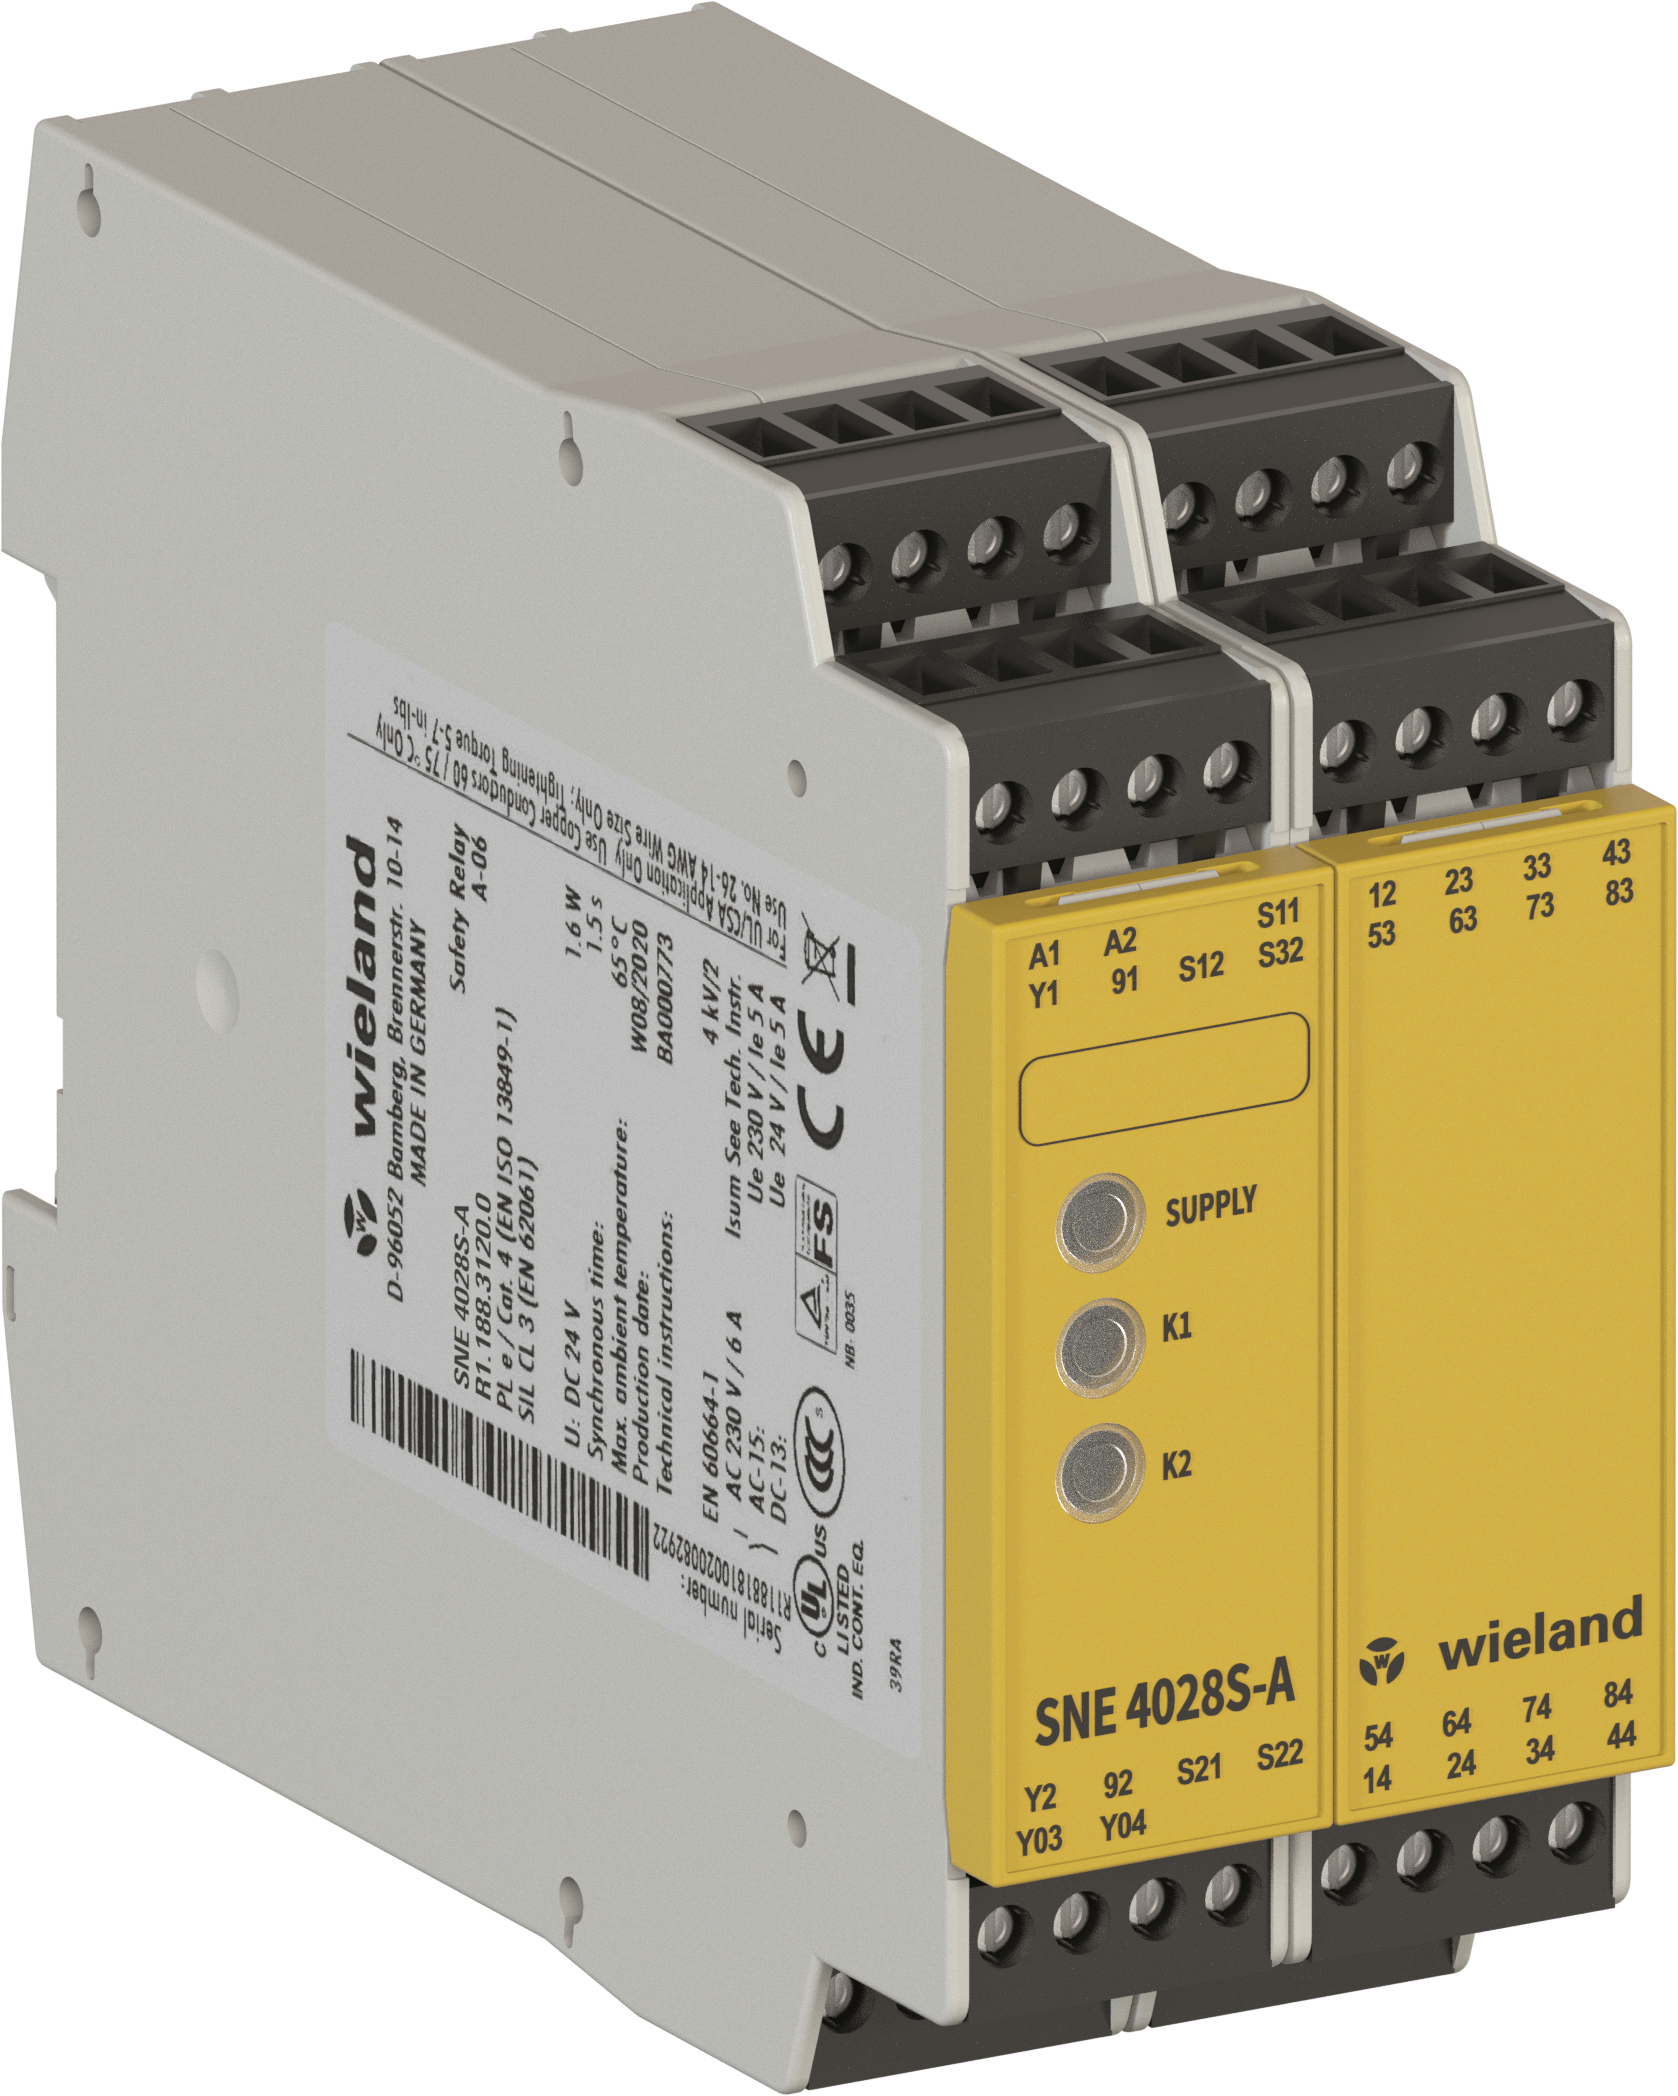 Wieland SNE 4028S Relay Expansion Unit